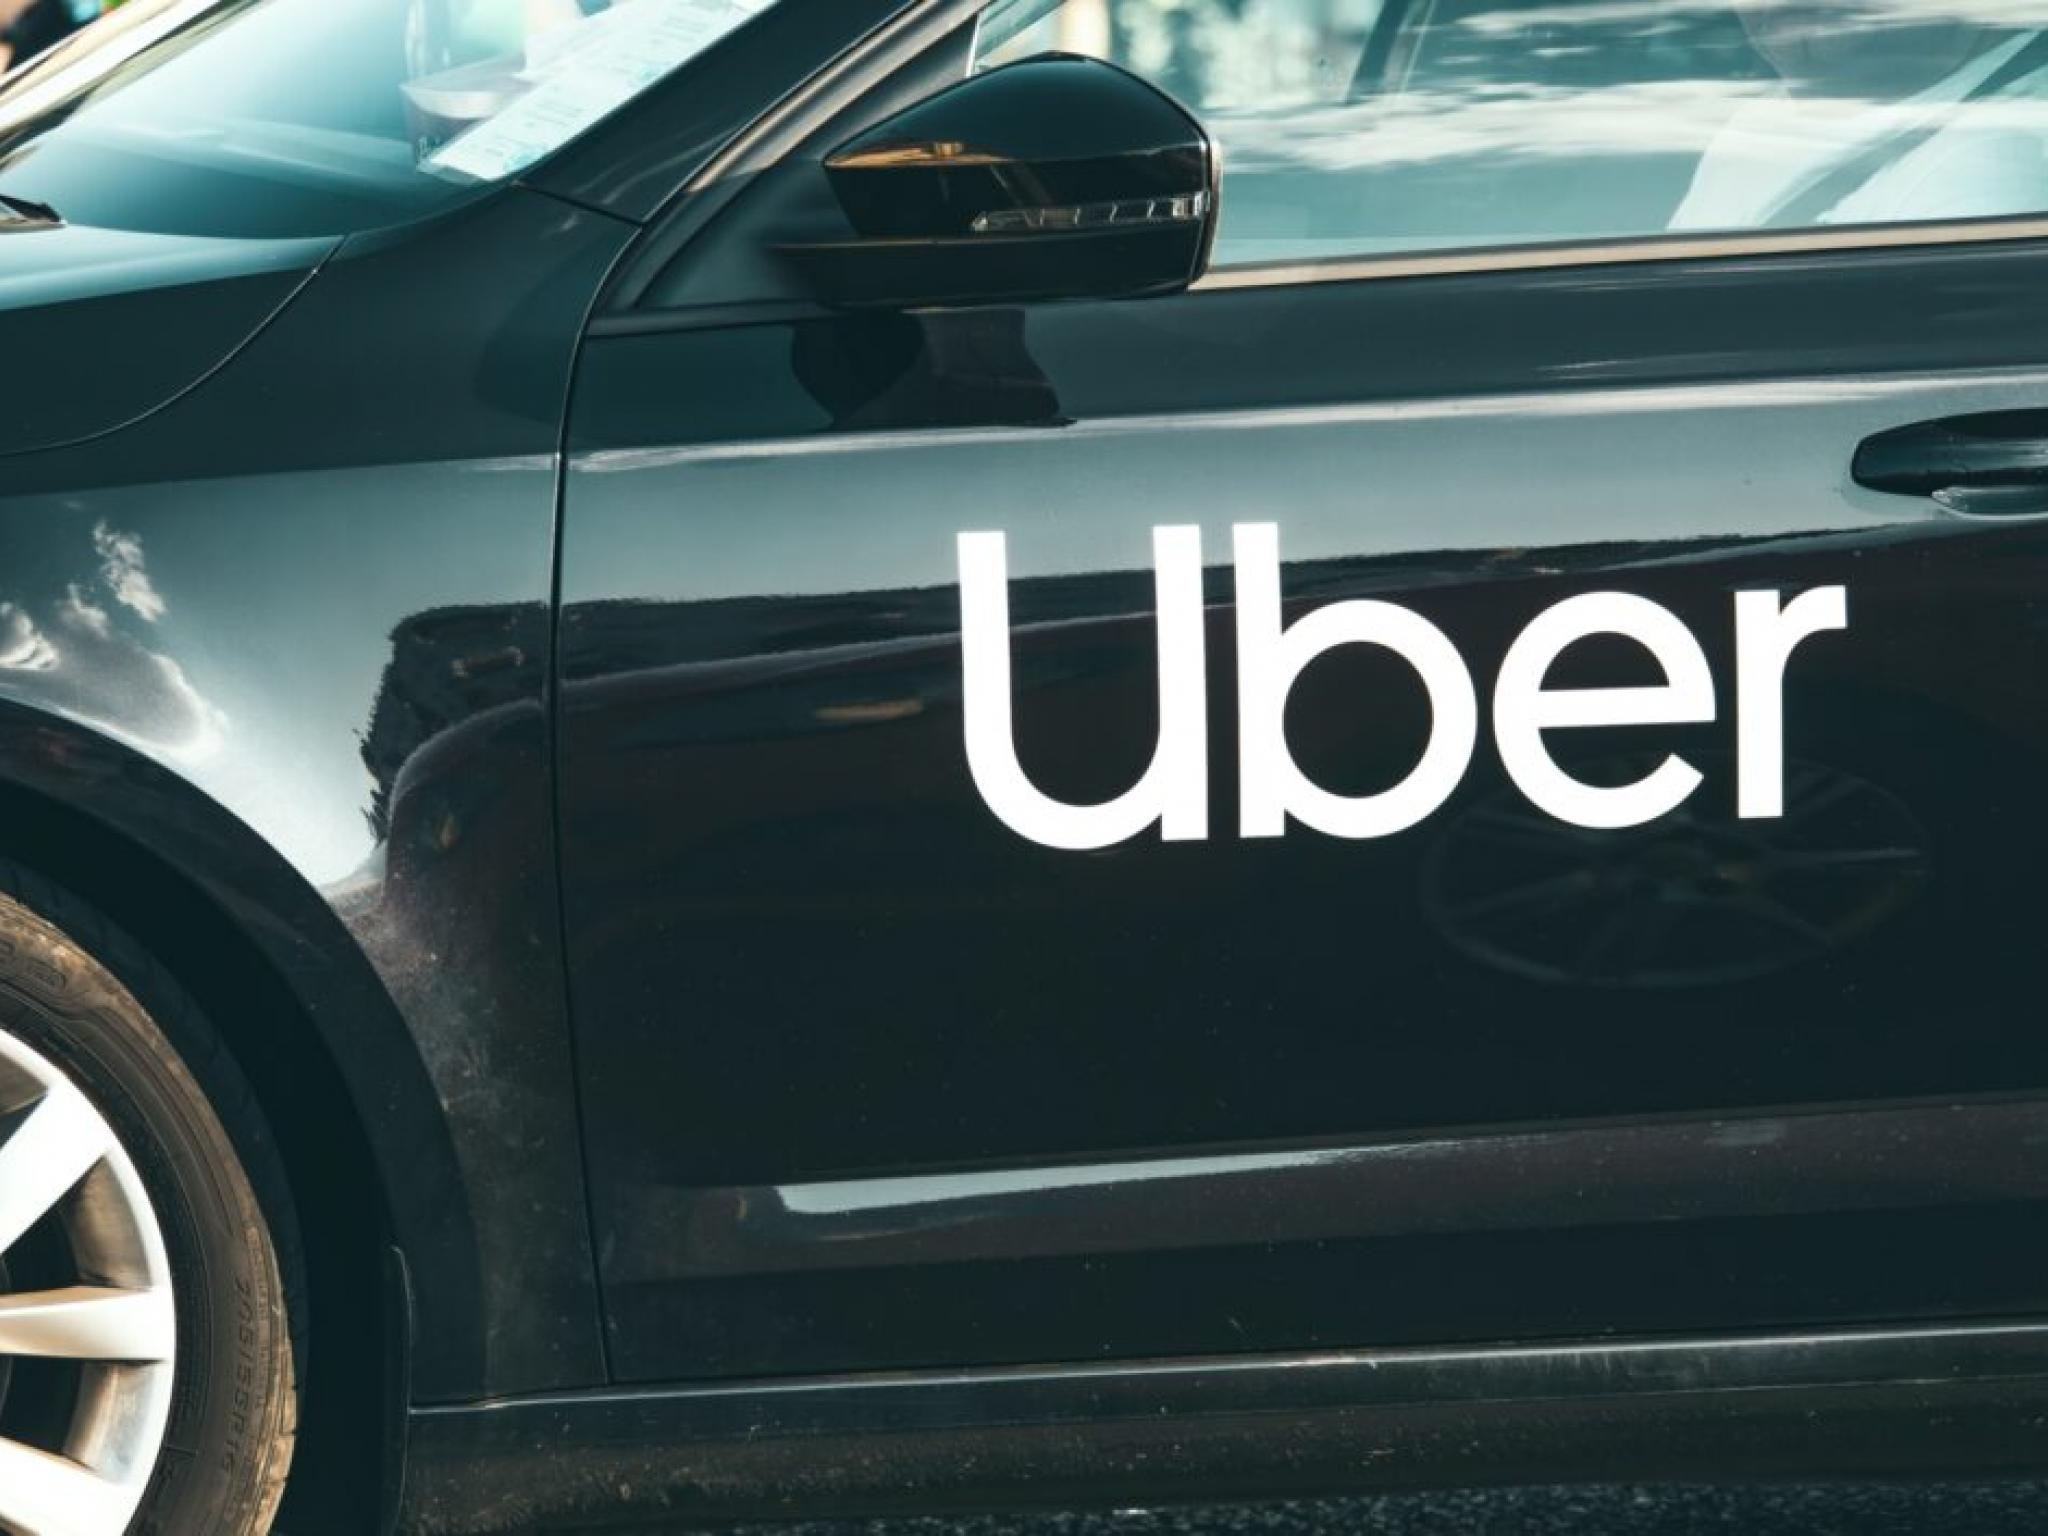  1000-for-5-weeks-uber-launches-new-program-for-car-owners-as-it-pushes-alternative-modes-of-transport-including-walking 